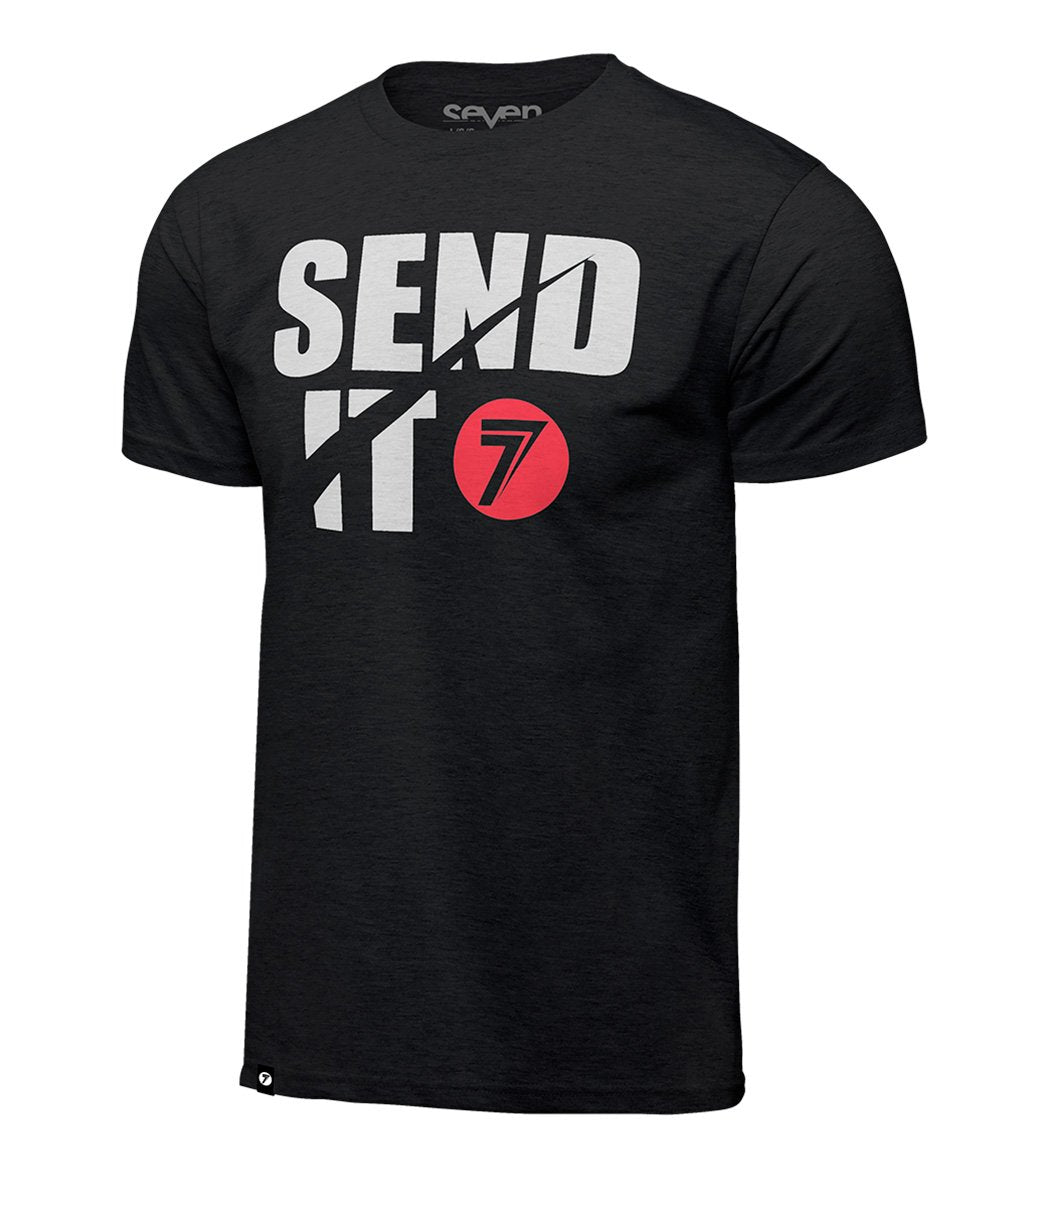 Send-It Tee - Black Heather (Small Only)